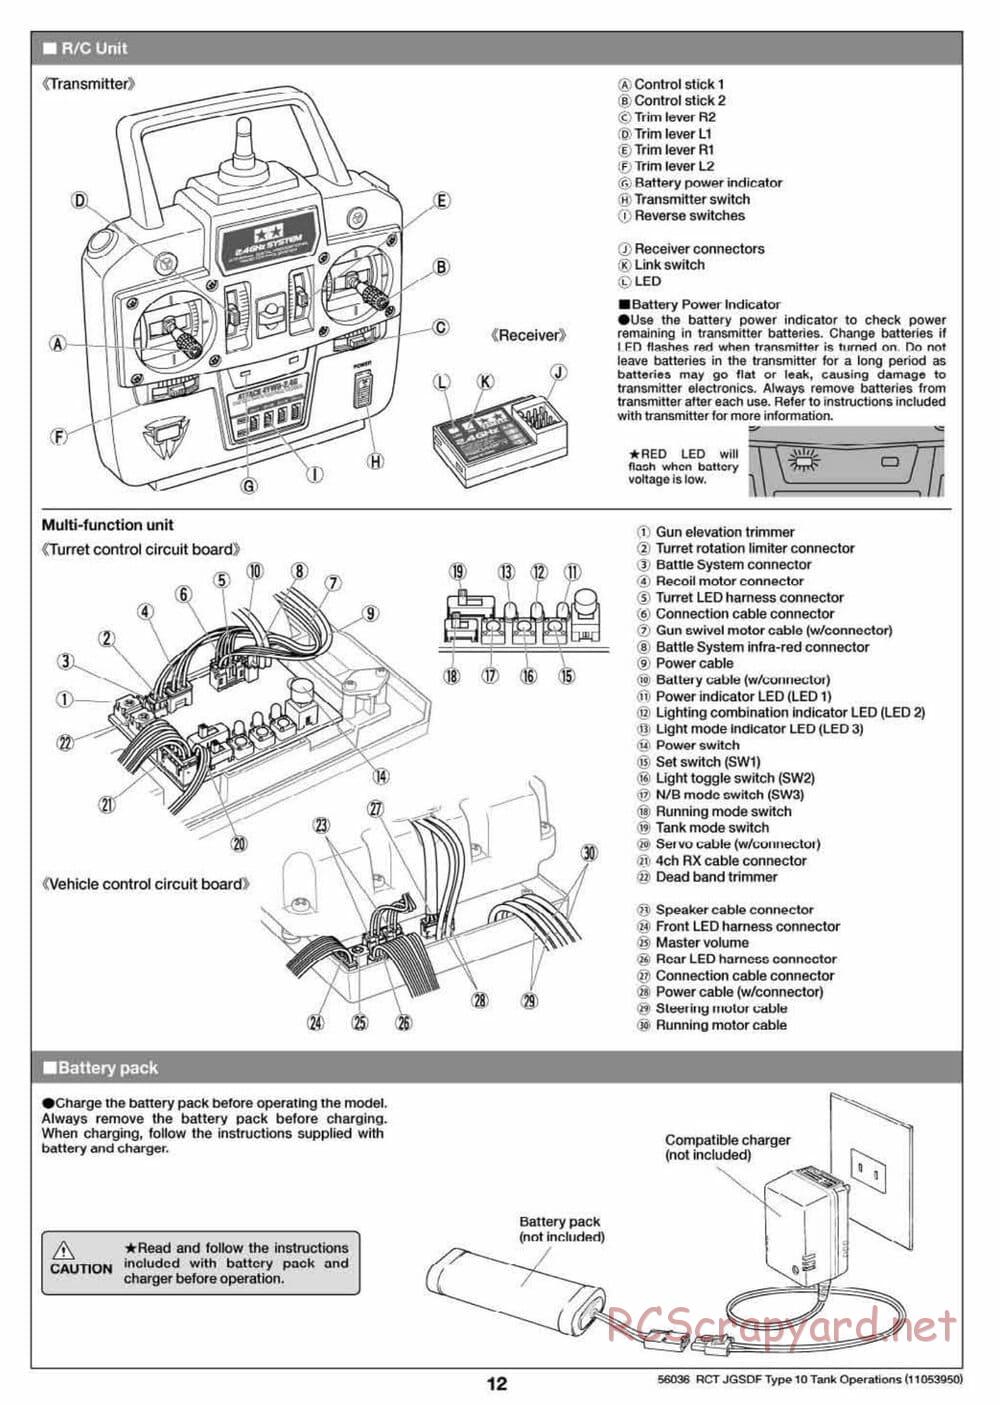 Tamiya - JGSDF Type 10 Tank - 1/16 Scale Chassis - Operation Manual - Page 2